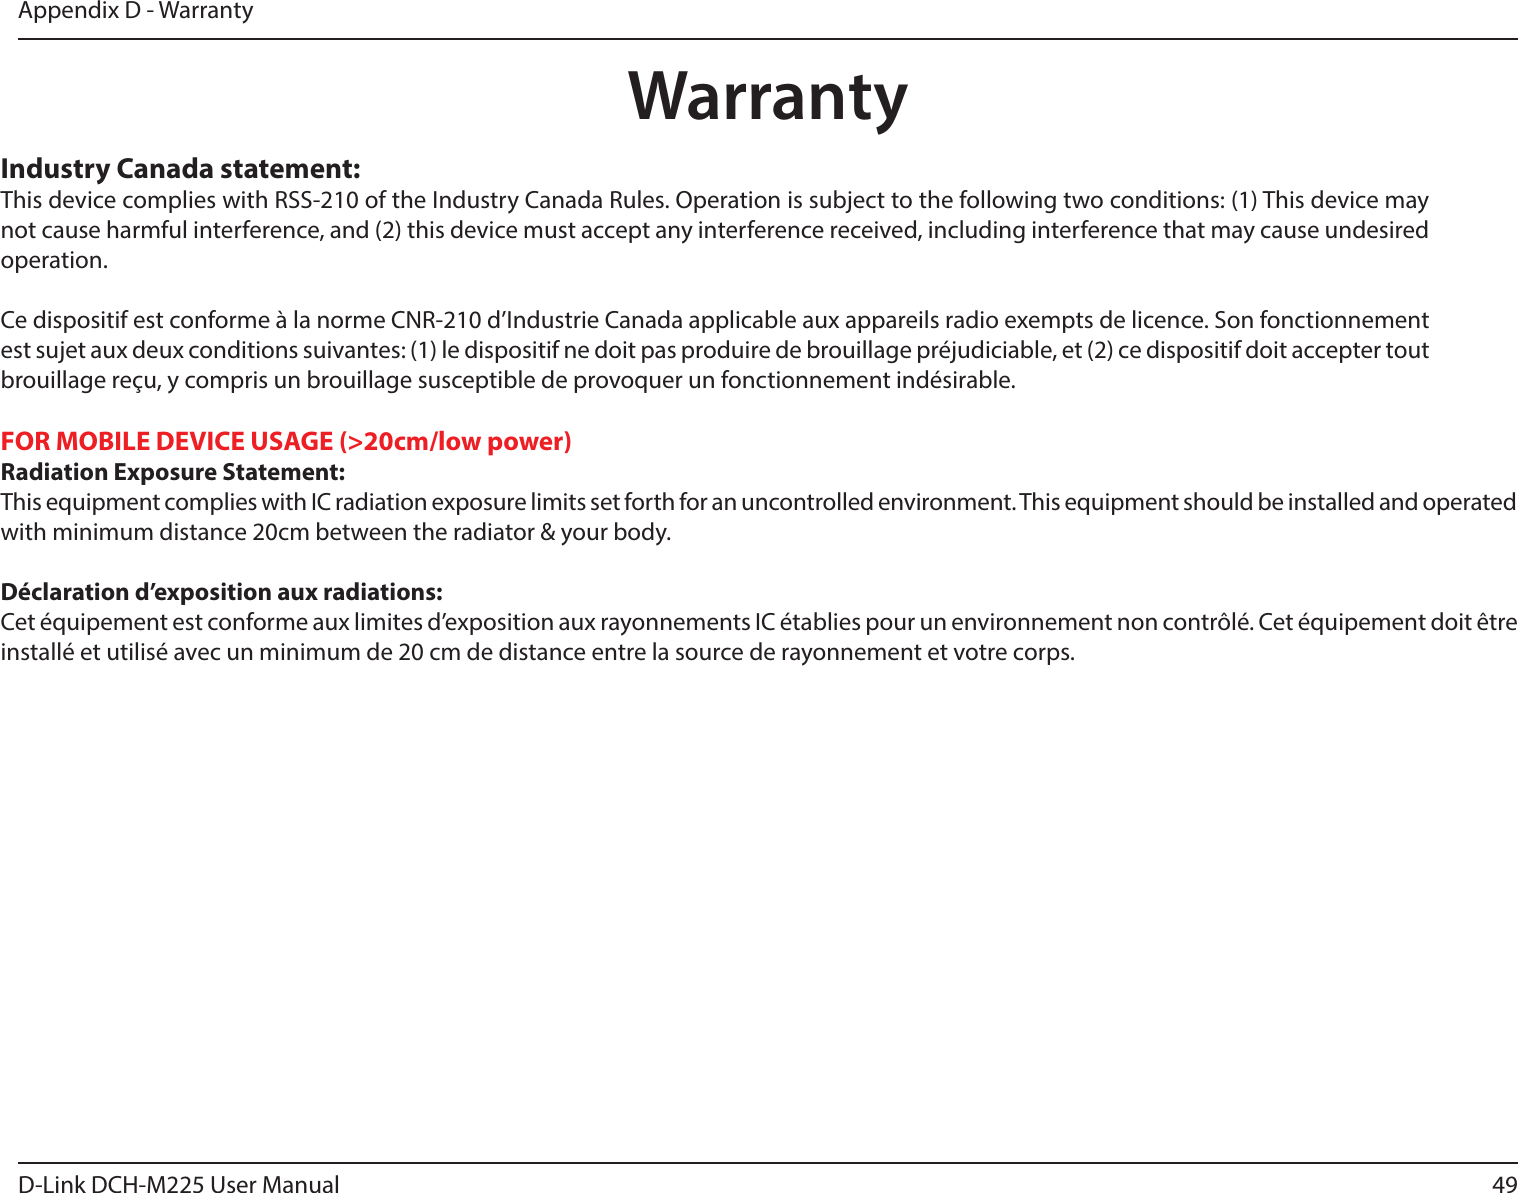 49D-Link DCH-M225 User ManualAppendix D - WarrantyWarrantyIndustry Canada statement:This device complies with RSS-210 of the Industry Canada Rules. Operation is subject to the following two conditions: (1) This device may not cause harmful interference, and (2) this device must accept any interference received, including interference that may cause undesired operation.Ce dispositif est conforme à la norme CNR-210 d’Industrie Canada applicable aux appareils radio exempts de licence. Son fonctionnement est sujet aux deux conditions suivantes: (1) le dispositif ne doit pas produire de brouillage préjudiciable, et (2) ce dispositif doit accepter tout brouillage reçu, y compris un brouillage susceptible de provoquer un fonctionnement indésirable.FOR MOBILE DEVICE USAGE (&gt;20cm/low power)Radiation Exposure Statement:This equipment complies with IC radiation exposure limits set forth for an uncontrolled environment. This equipment should be installed and operated with minimum distance 20cm between the radiator &amp; your body. Déclaration d’exposition aux radiations:Cet équipement est conforme aux limites d’exposition aux rayonnements IC établies pour un environnement non contrôlé. Cet équipement doit être installé et utilisé avec un minimum de 20 cm de distance entre la source de rayonnement et votre corps.